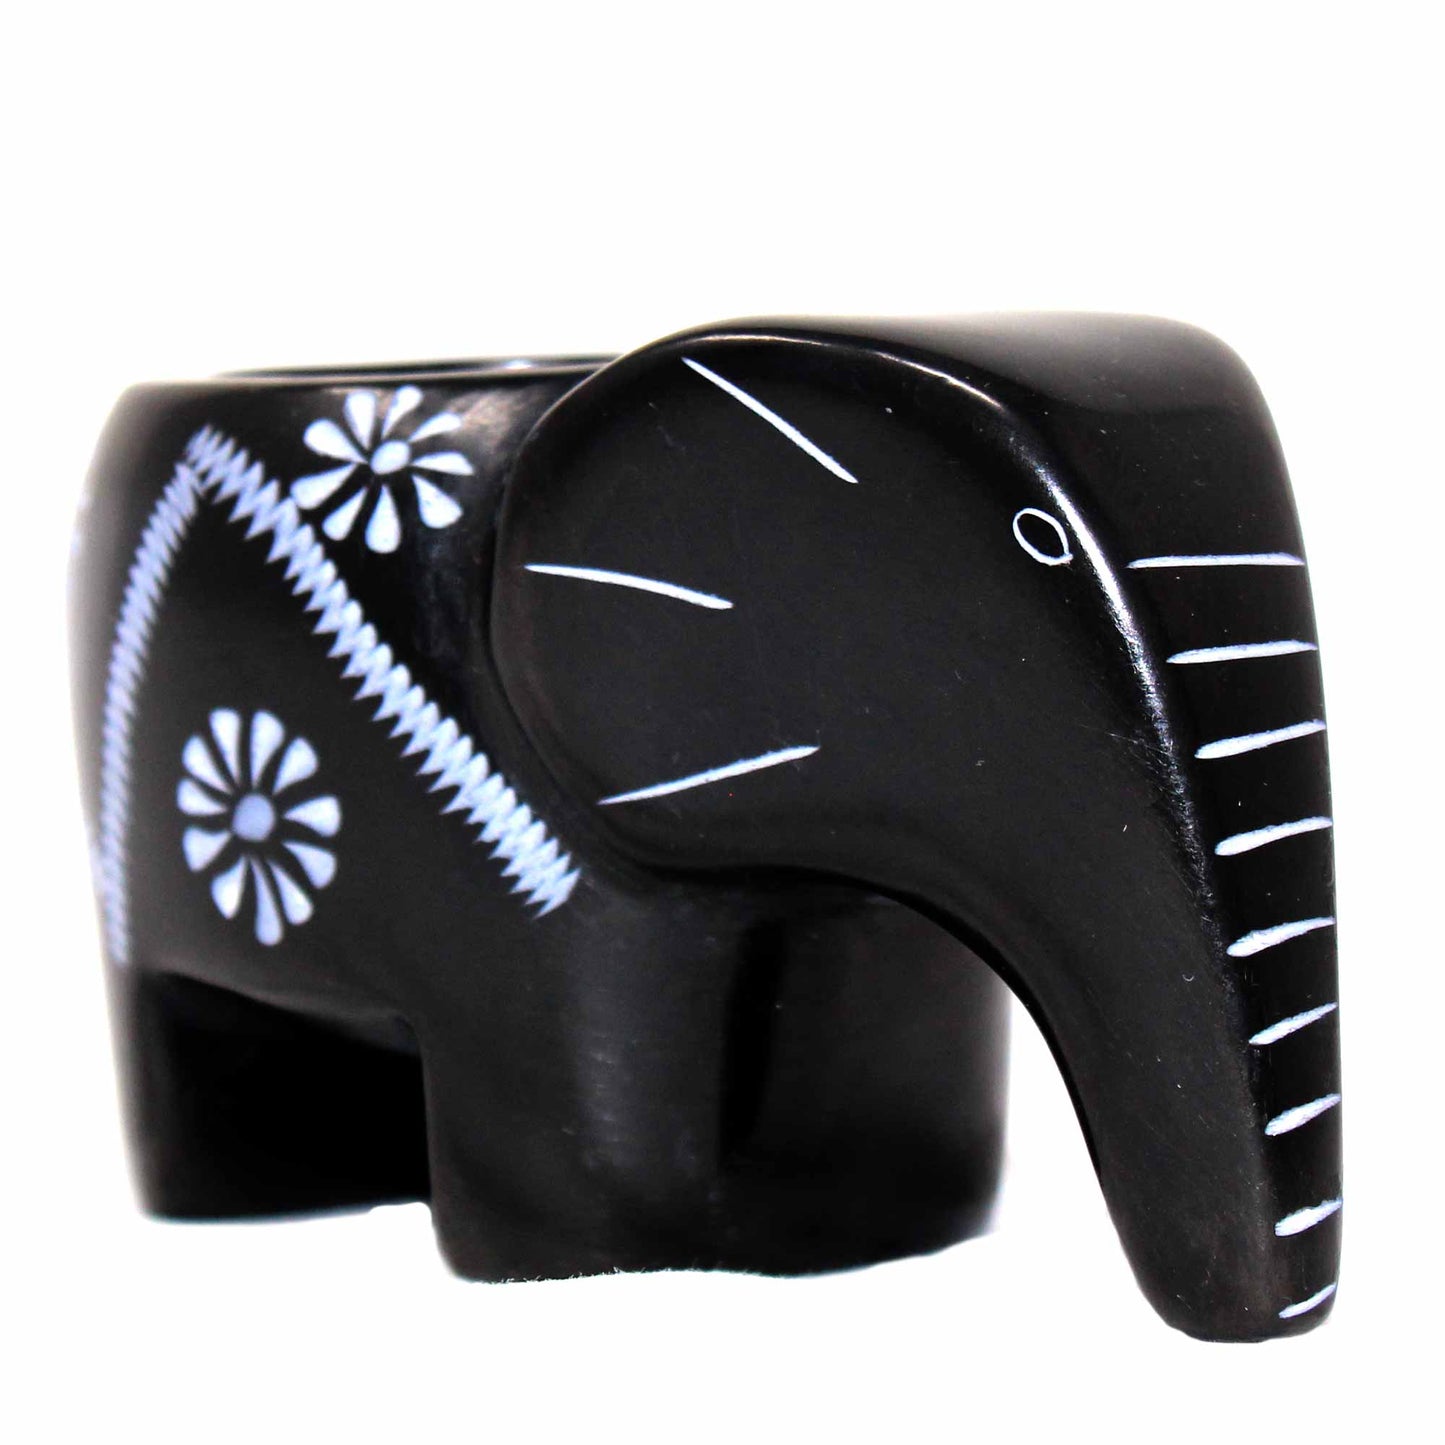 Lucky Elephant Soapstone Tea Light; Black Finish with Etched Design 4"l x  2.5"t x 1.75"w - Linda Kay Gifford’s - Those Nasty Women TALK! by SWEETSurvivor